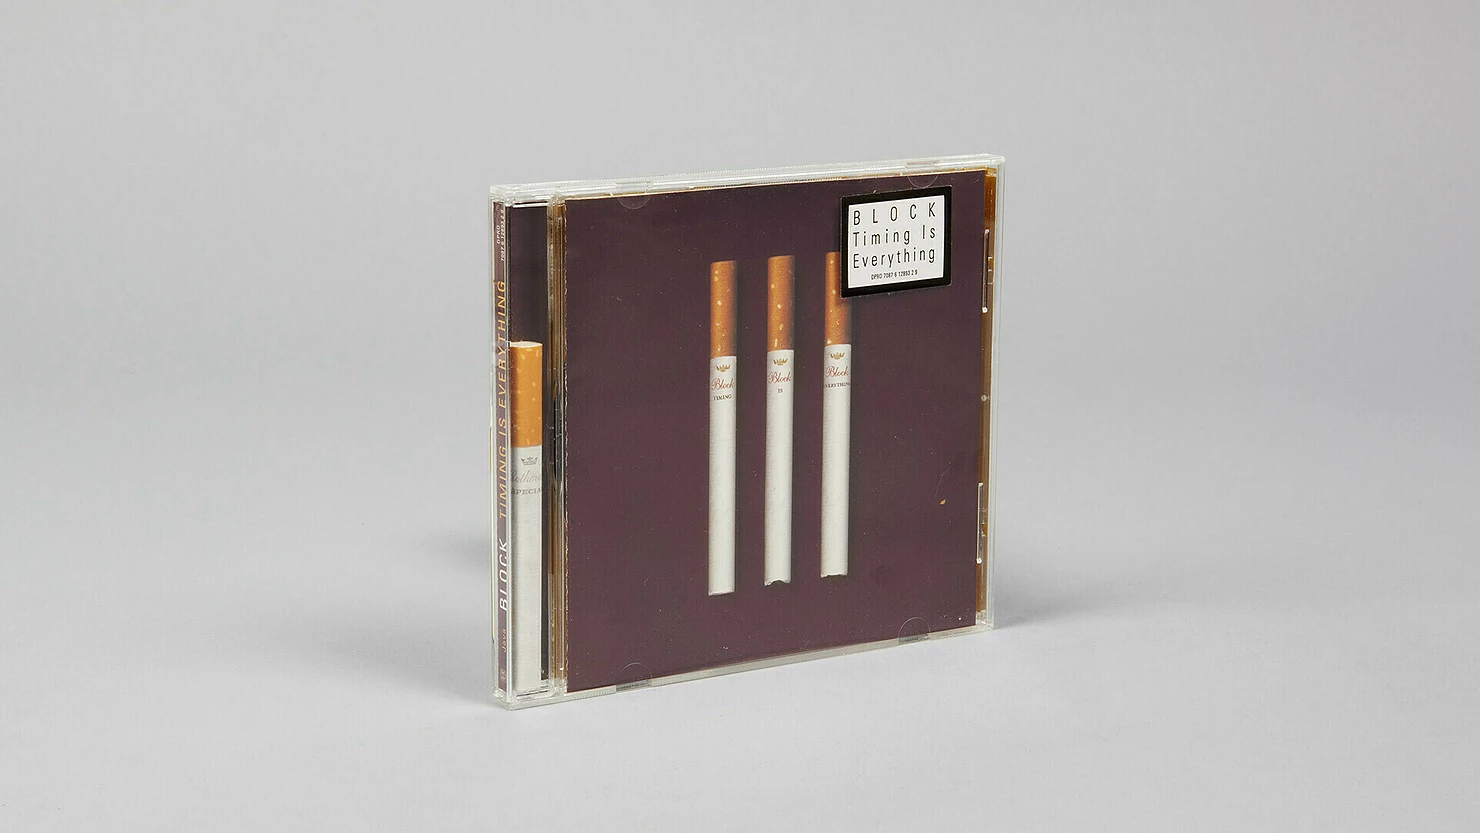 Sagmeister's CD cover for Jamie Block's "Timing is Everything", featuring a cigarette in the spine